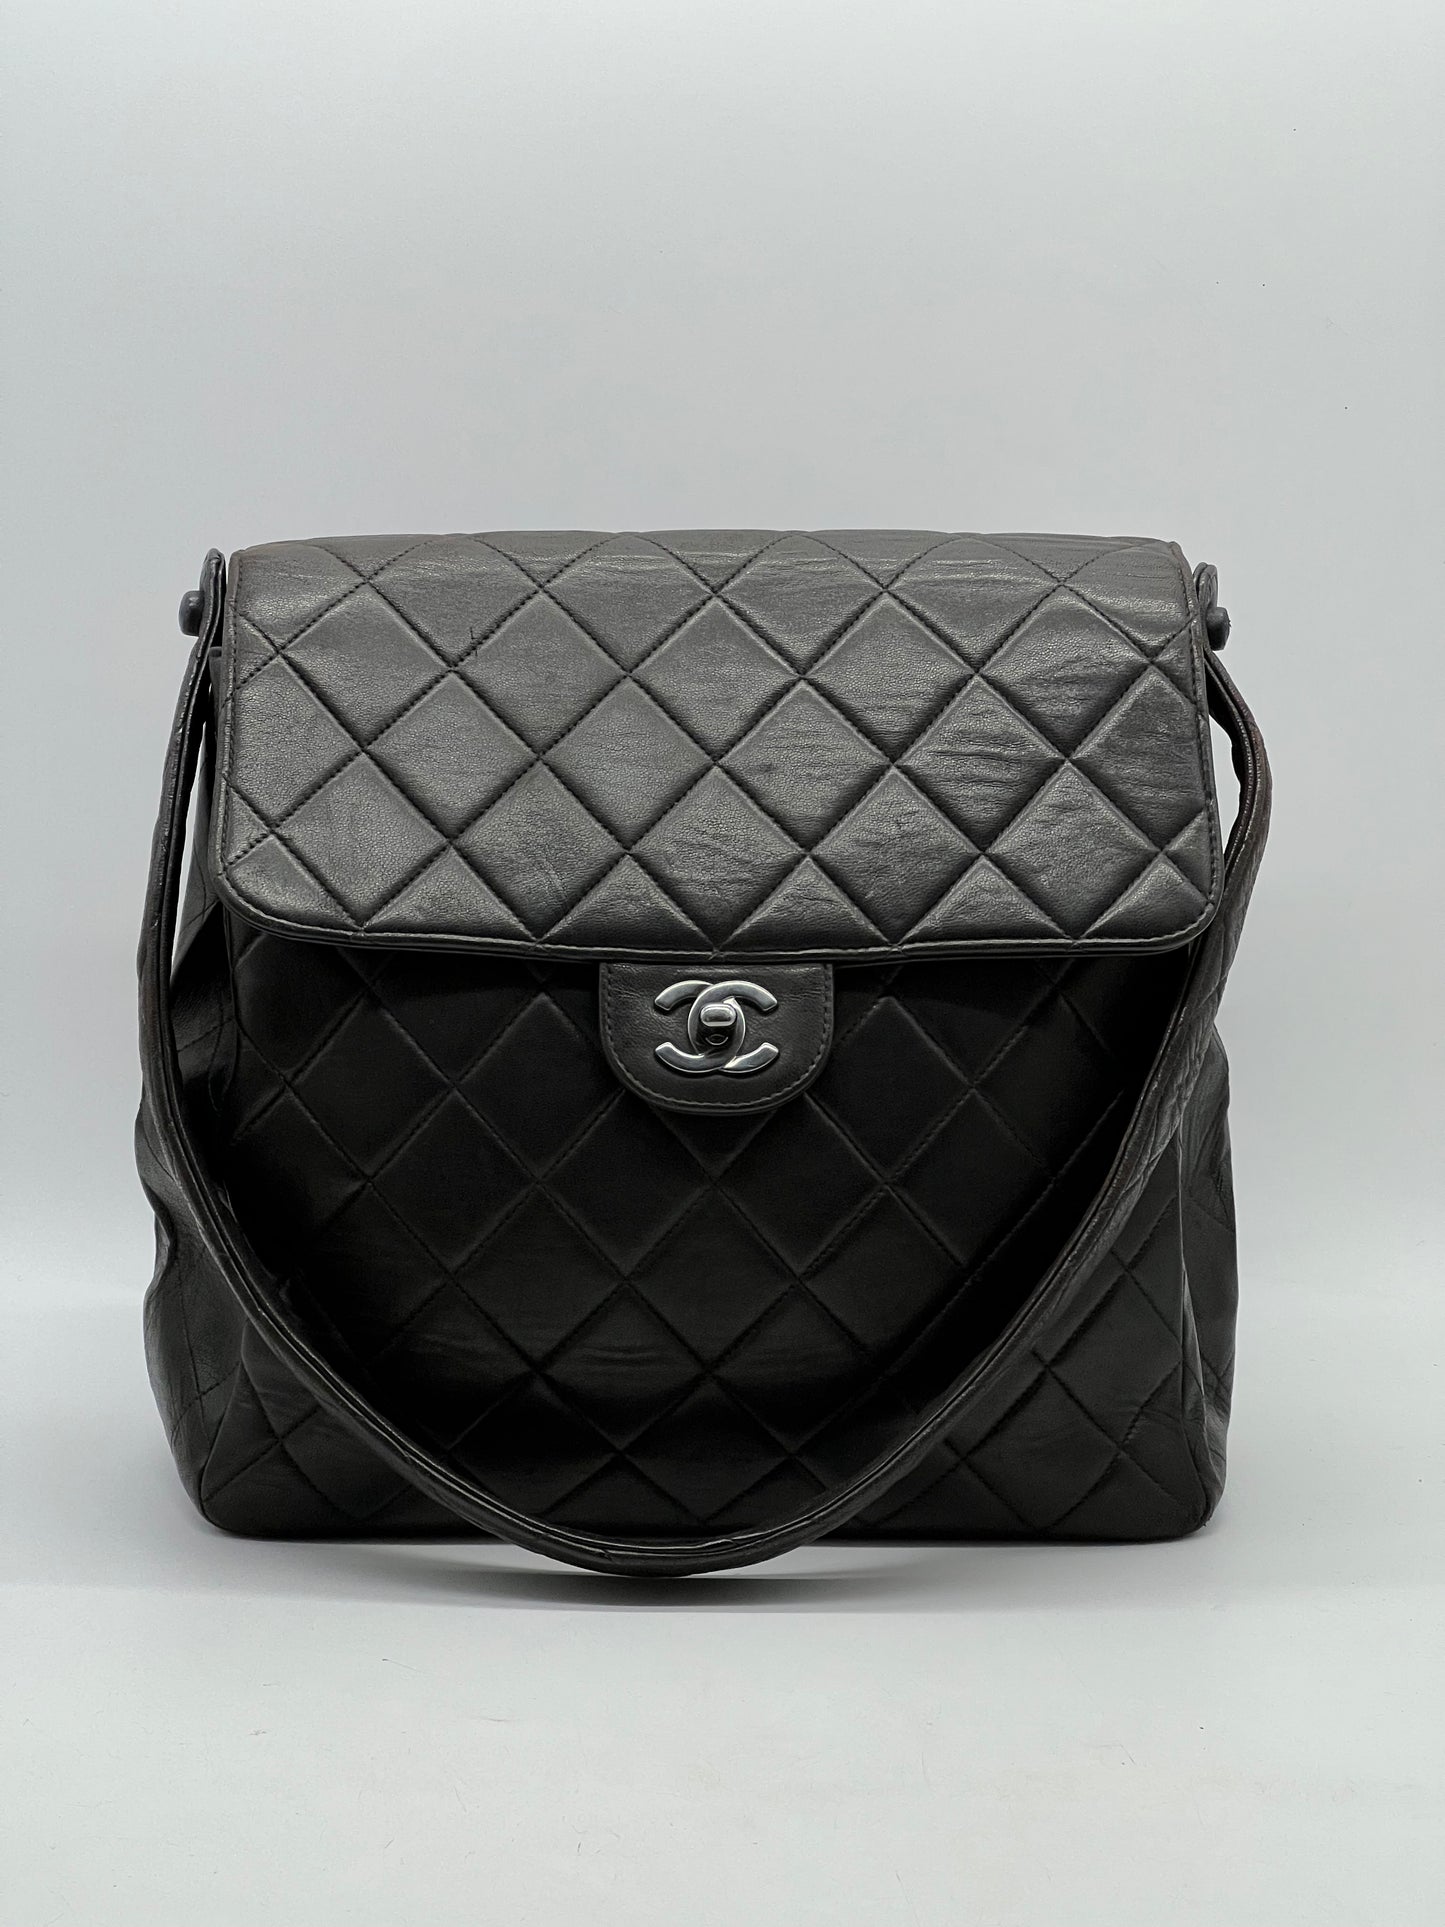 Chanel Vintage Double Sided Black Quilted Leather Medium Tote Hand Bag